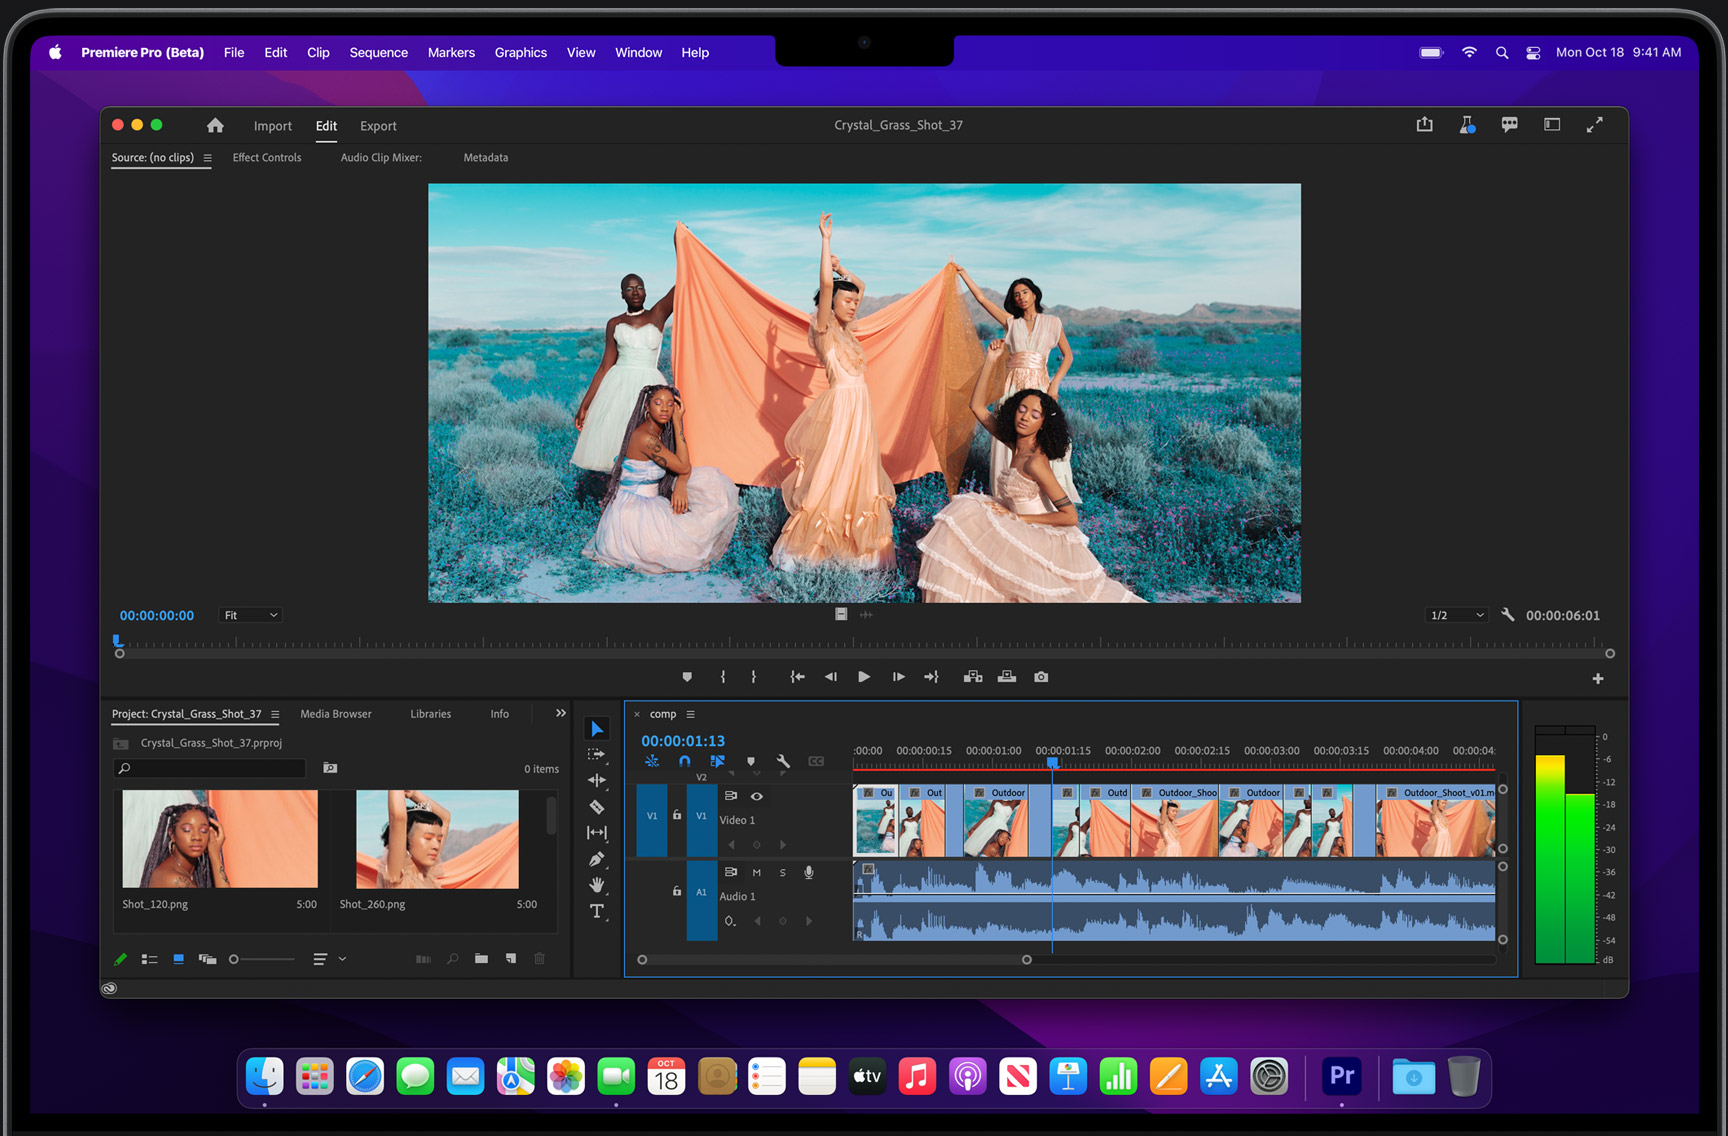 https://www.apple.com/v/macbook-pro-14-and-16/a/images/overview/macos/pro_apps_video_editing__bryjoek1wfki_large_2x.jpg